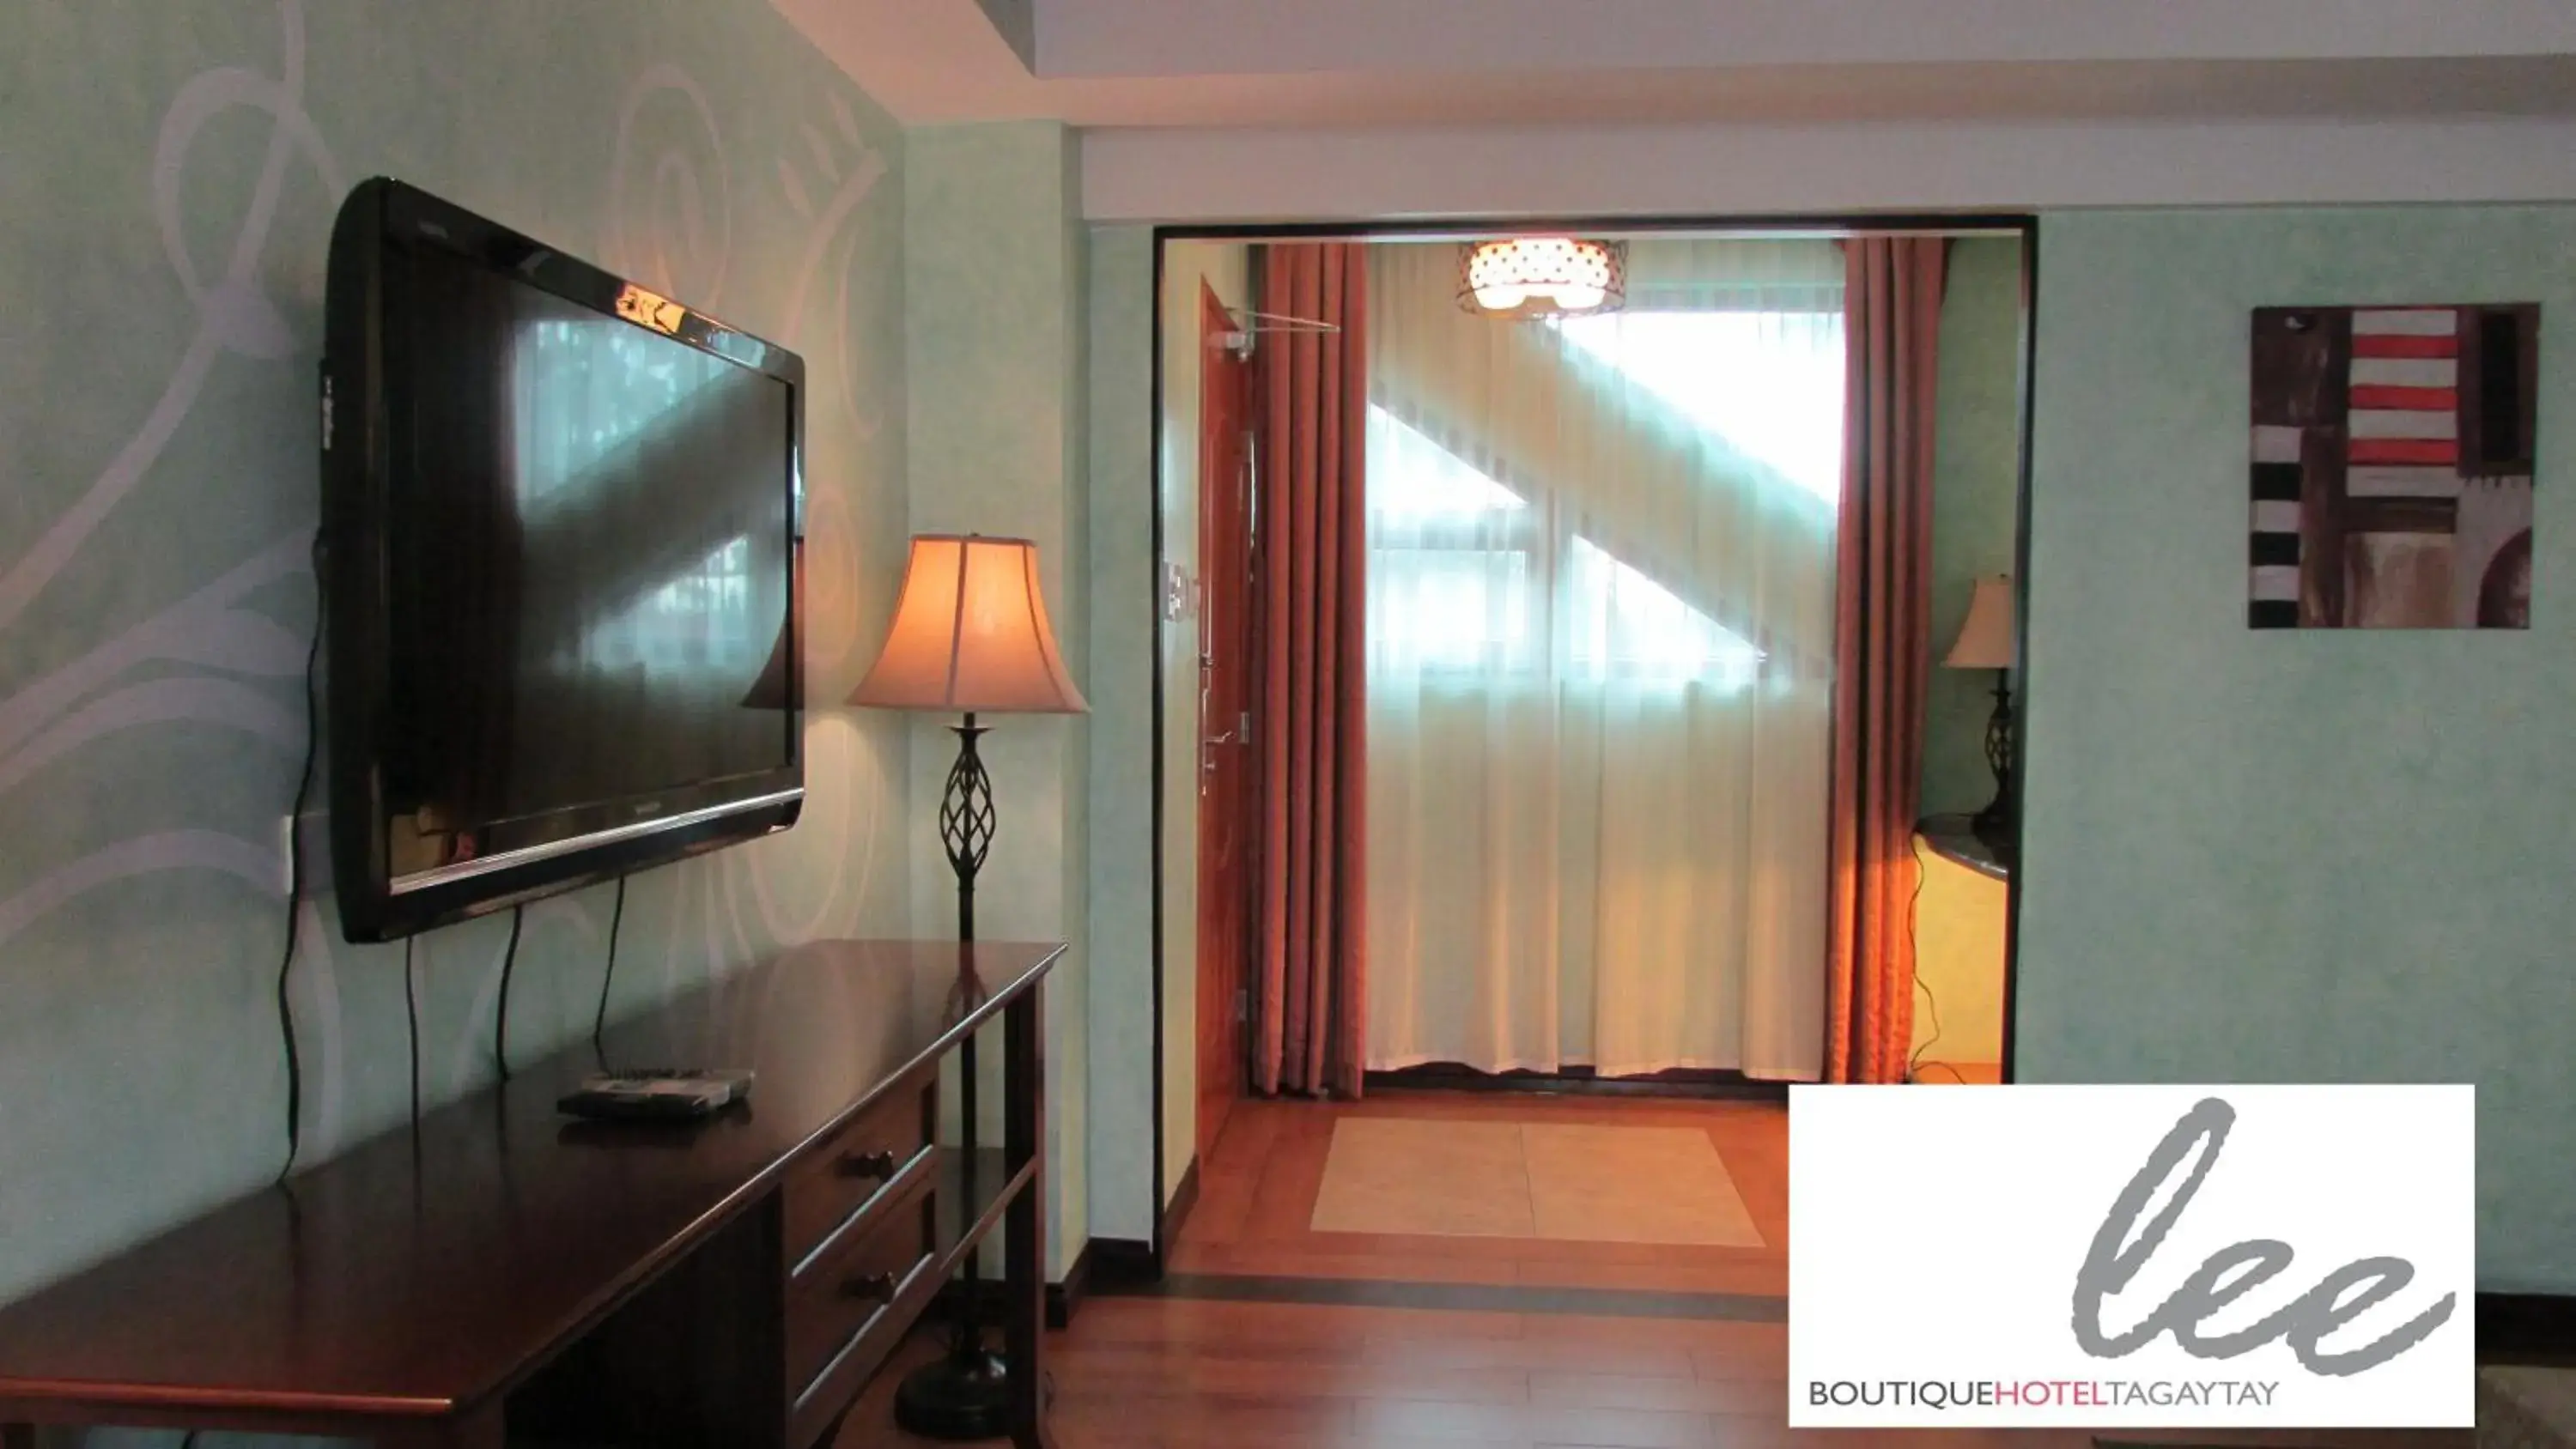 Bedroom, TV/Entertainment Center in Lee Boutique Hotel Tagaytay